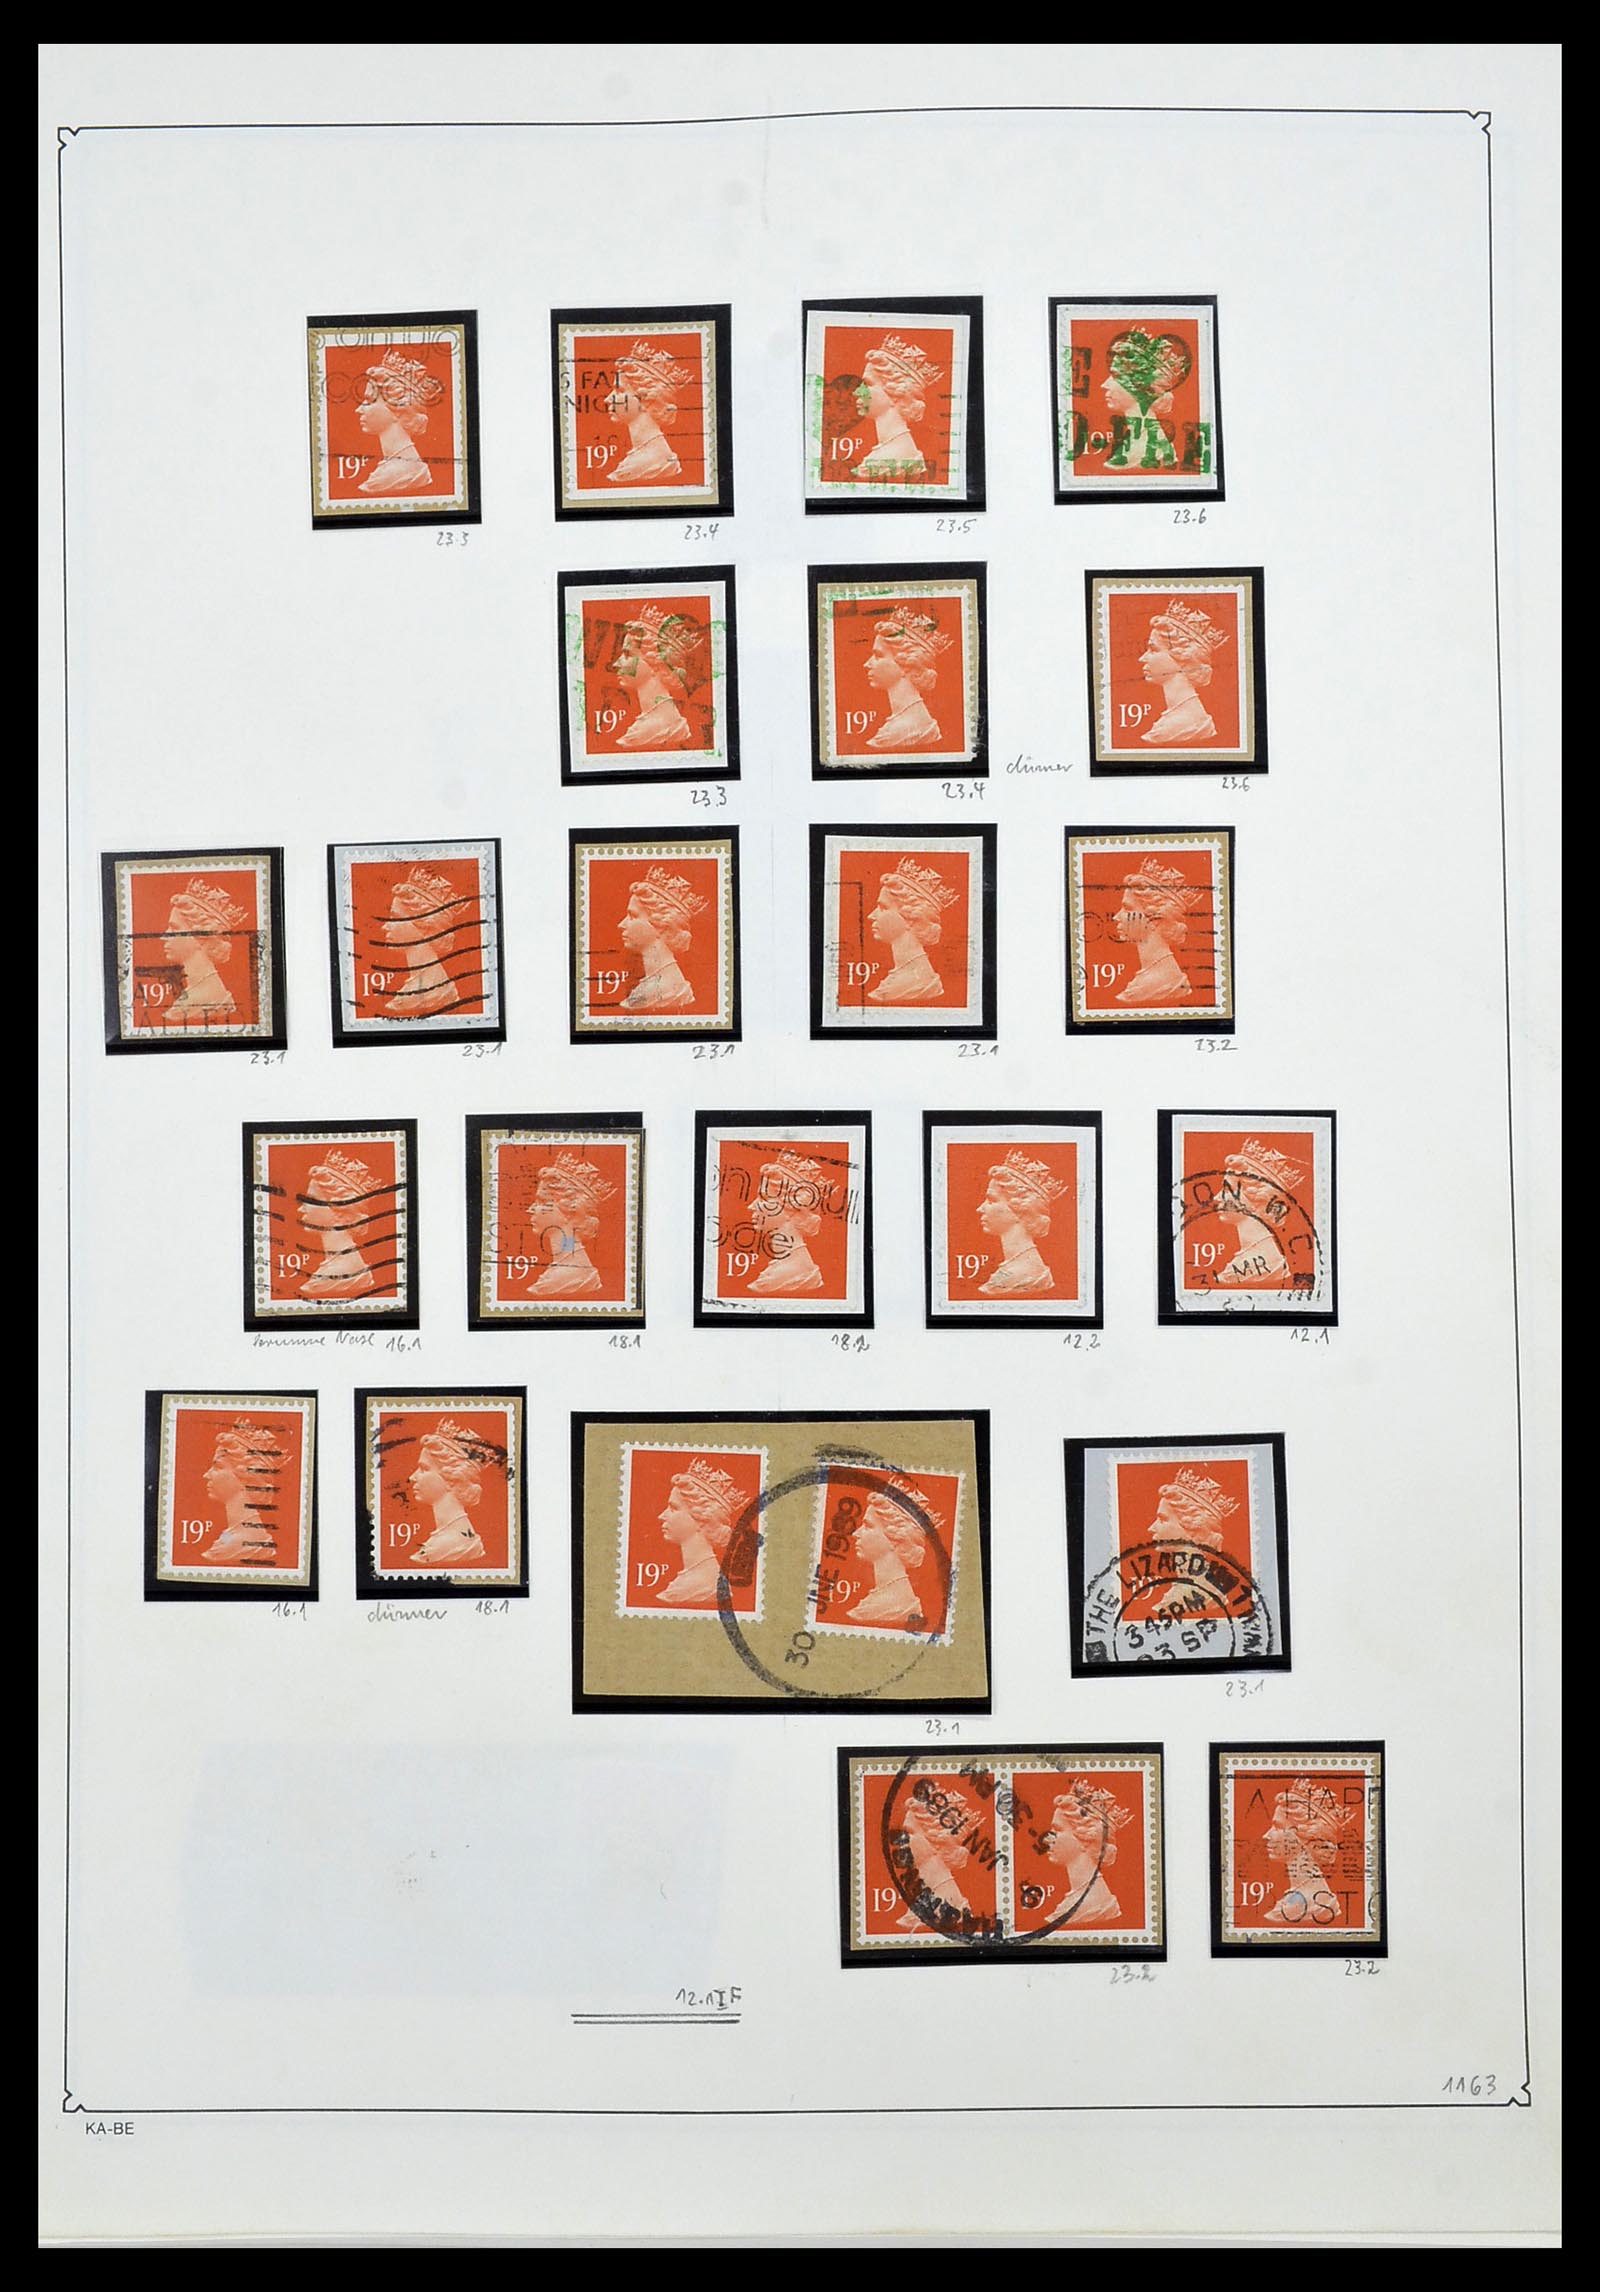 34221 084 - Stamp collection 34221 Great Britain Machins/castles 1971-2005.